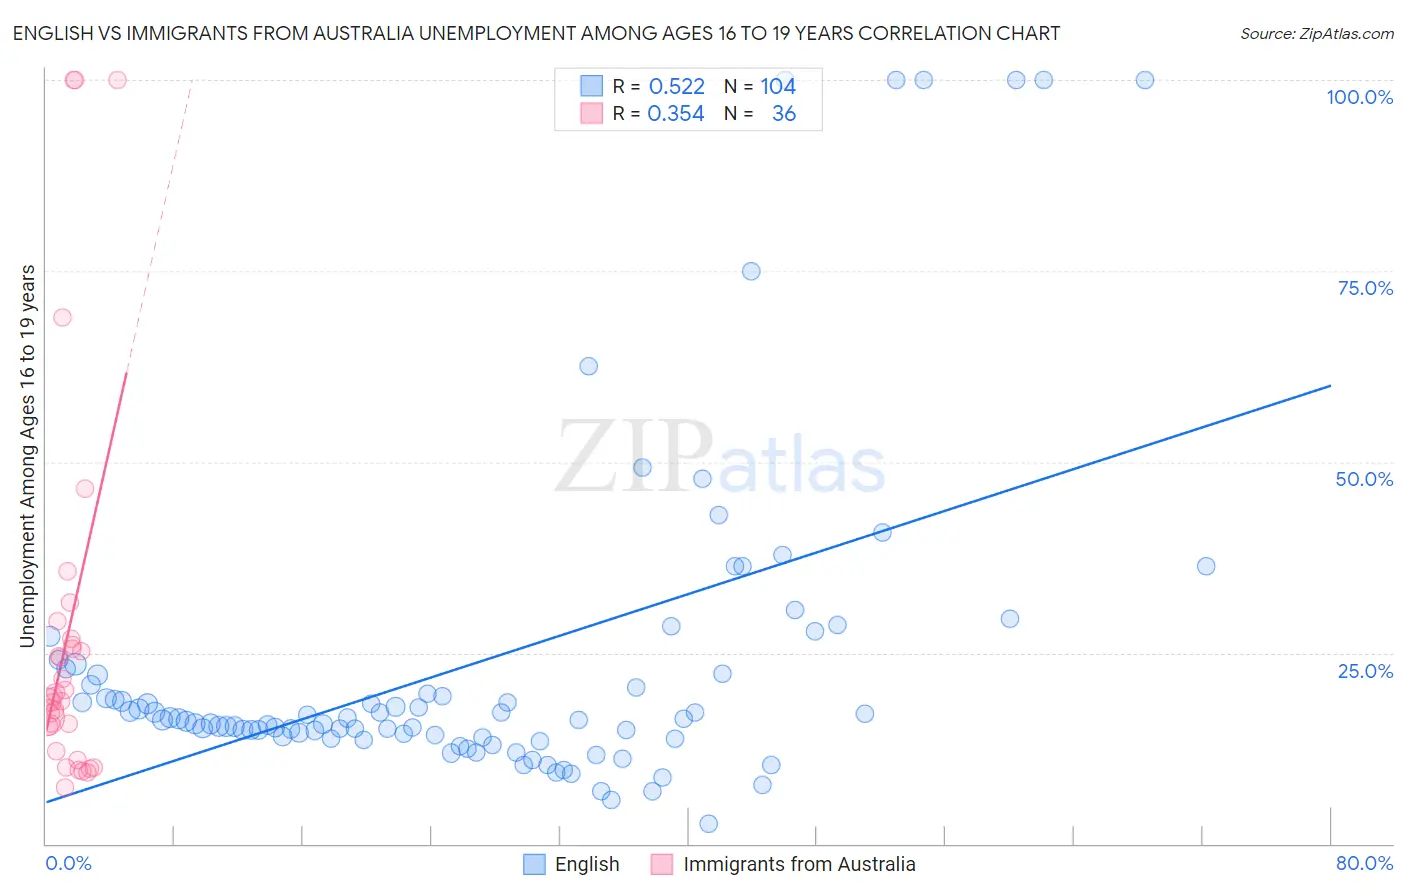 English vs Immigrants from Australia Unemployment Among Ages 16 to 19 years